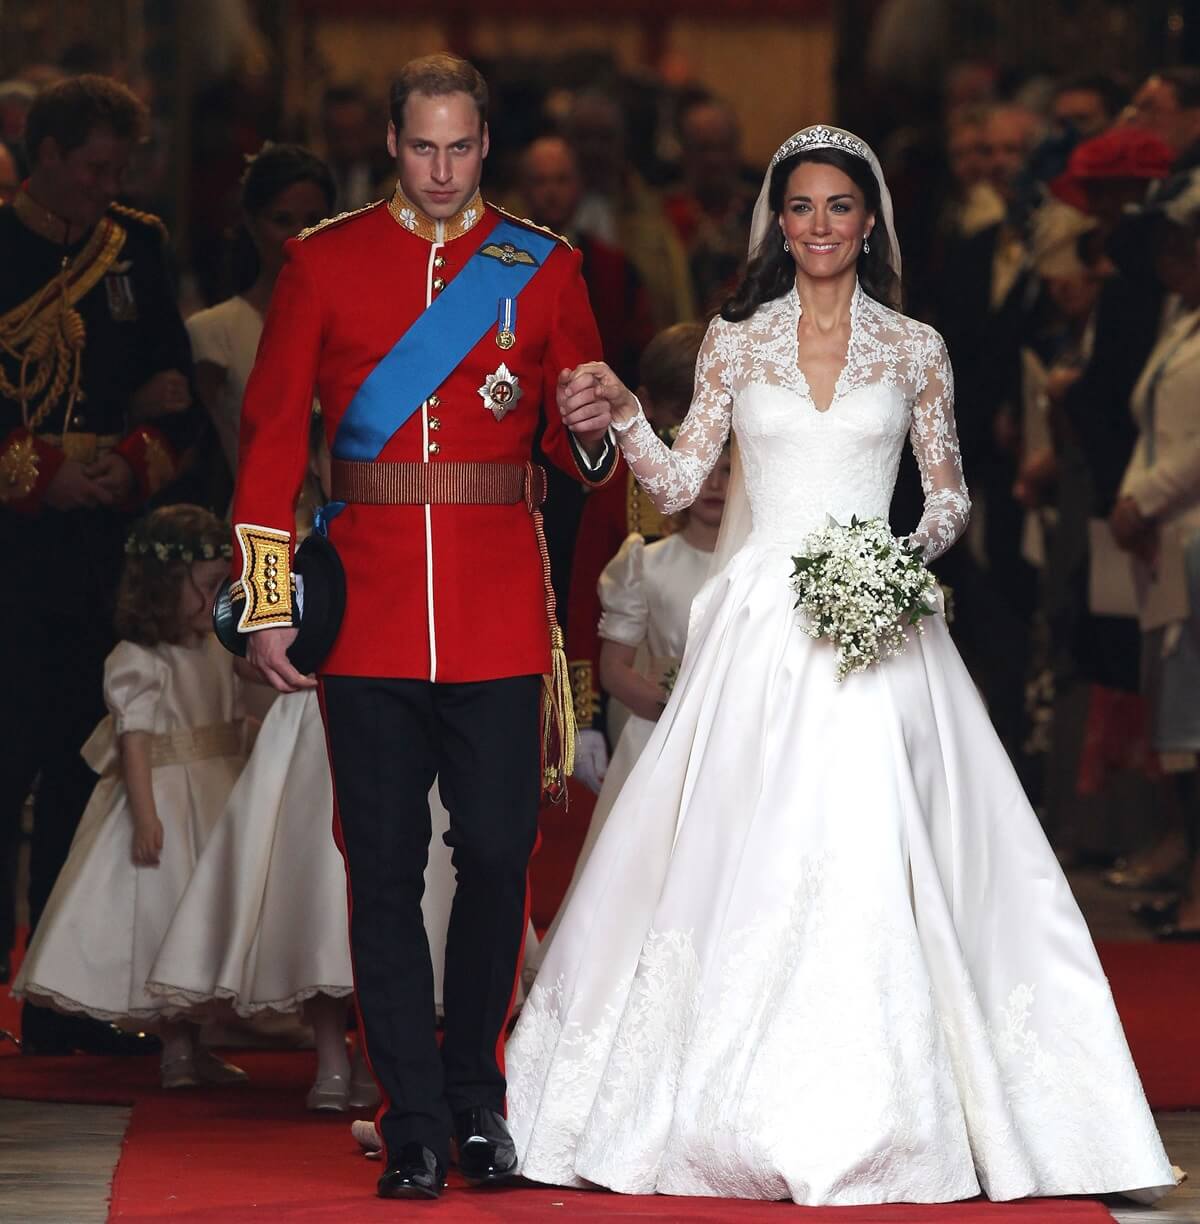 Prince William and Kate Middleton leaving Westminster Abbey following their wedding ceremony